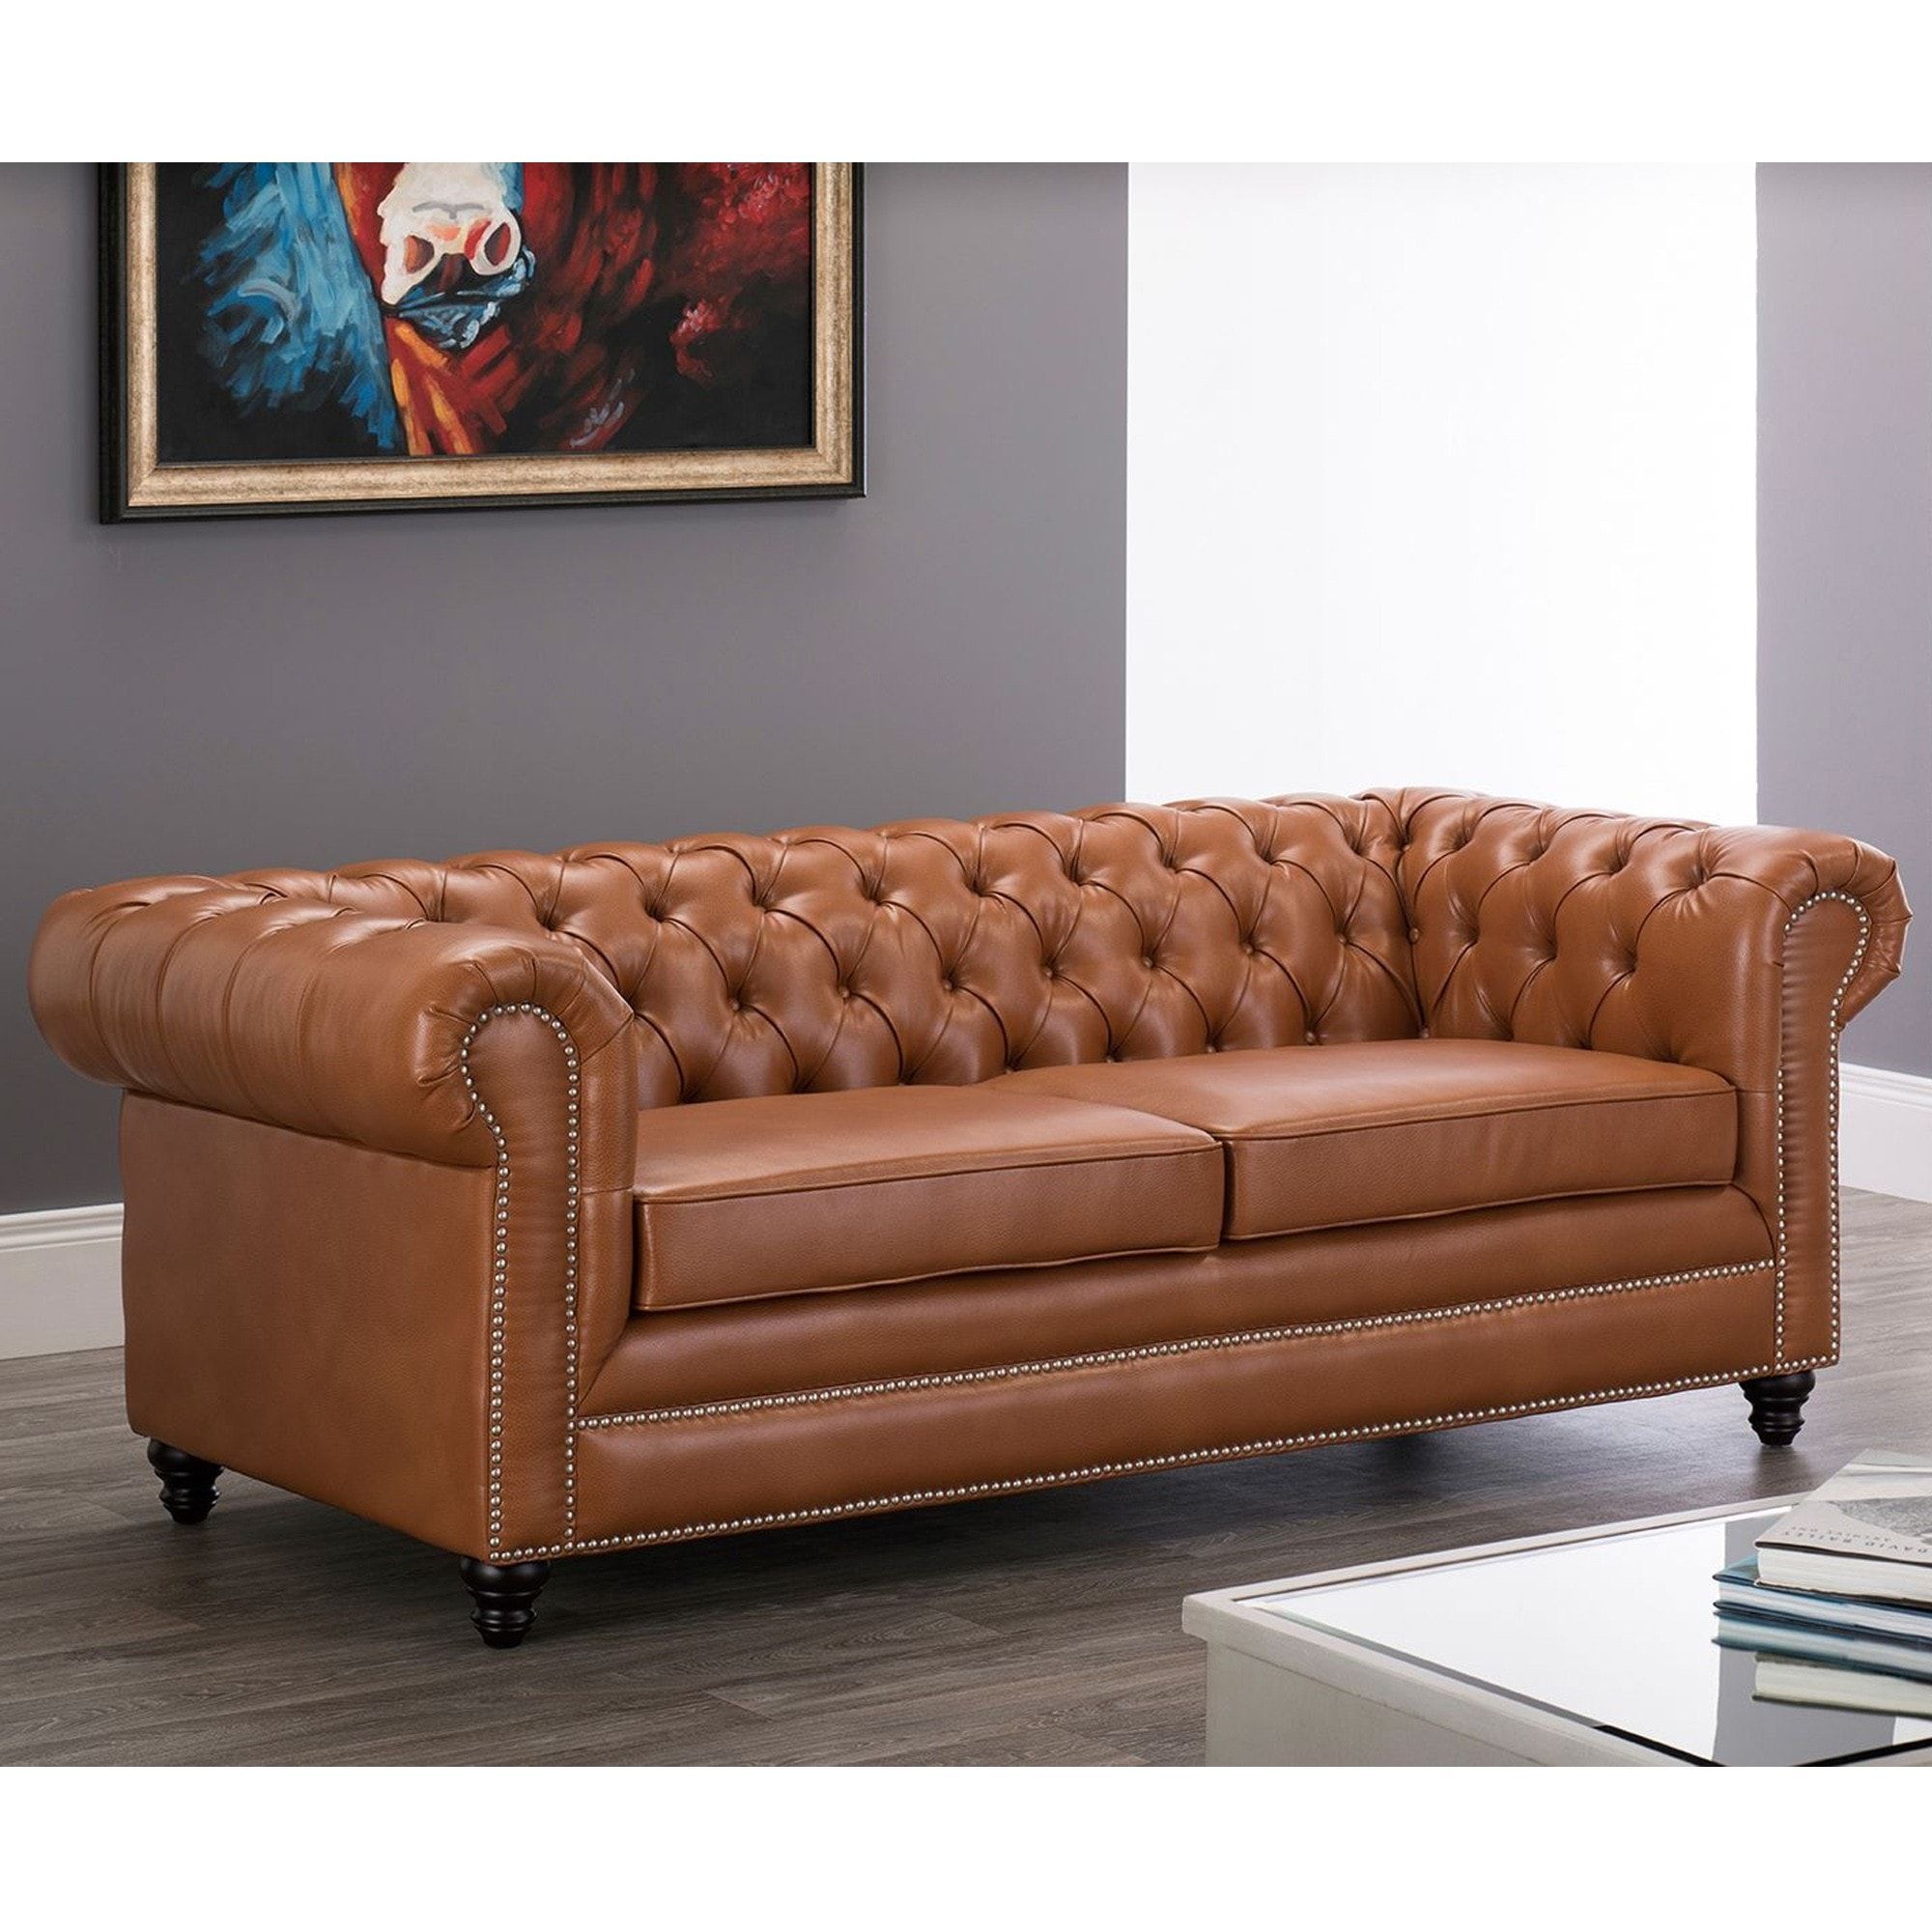 Faux Leather Chesterfield 3 Seater Sofa Tan | Tan Chesterfield Sofa Inside Chesterfield Sofas (Gallery 4 of 21)